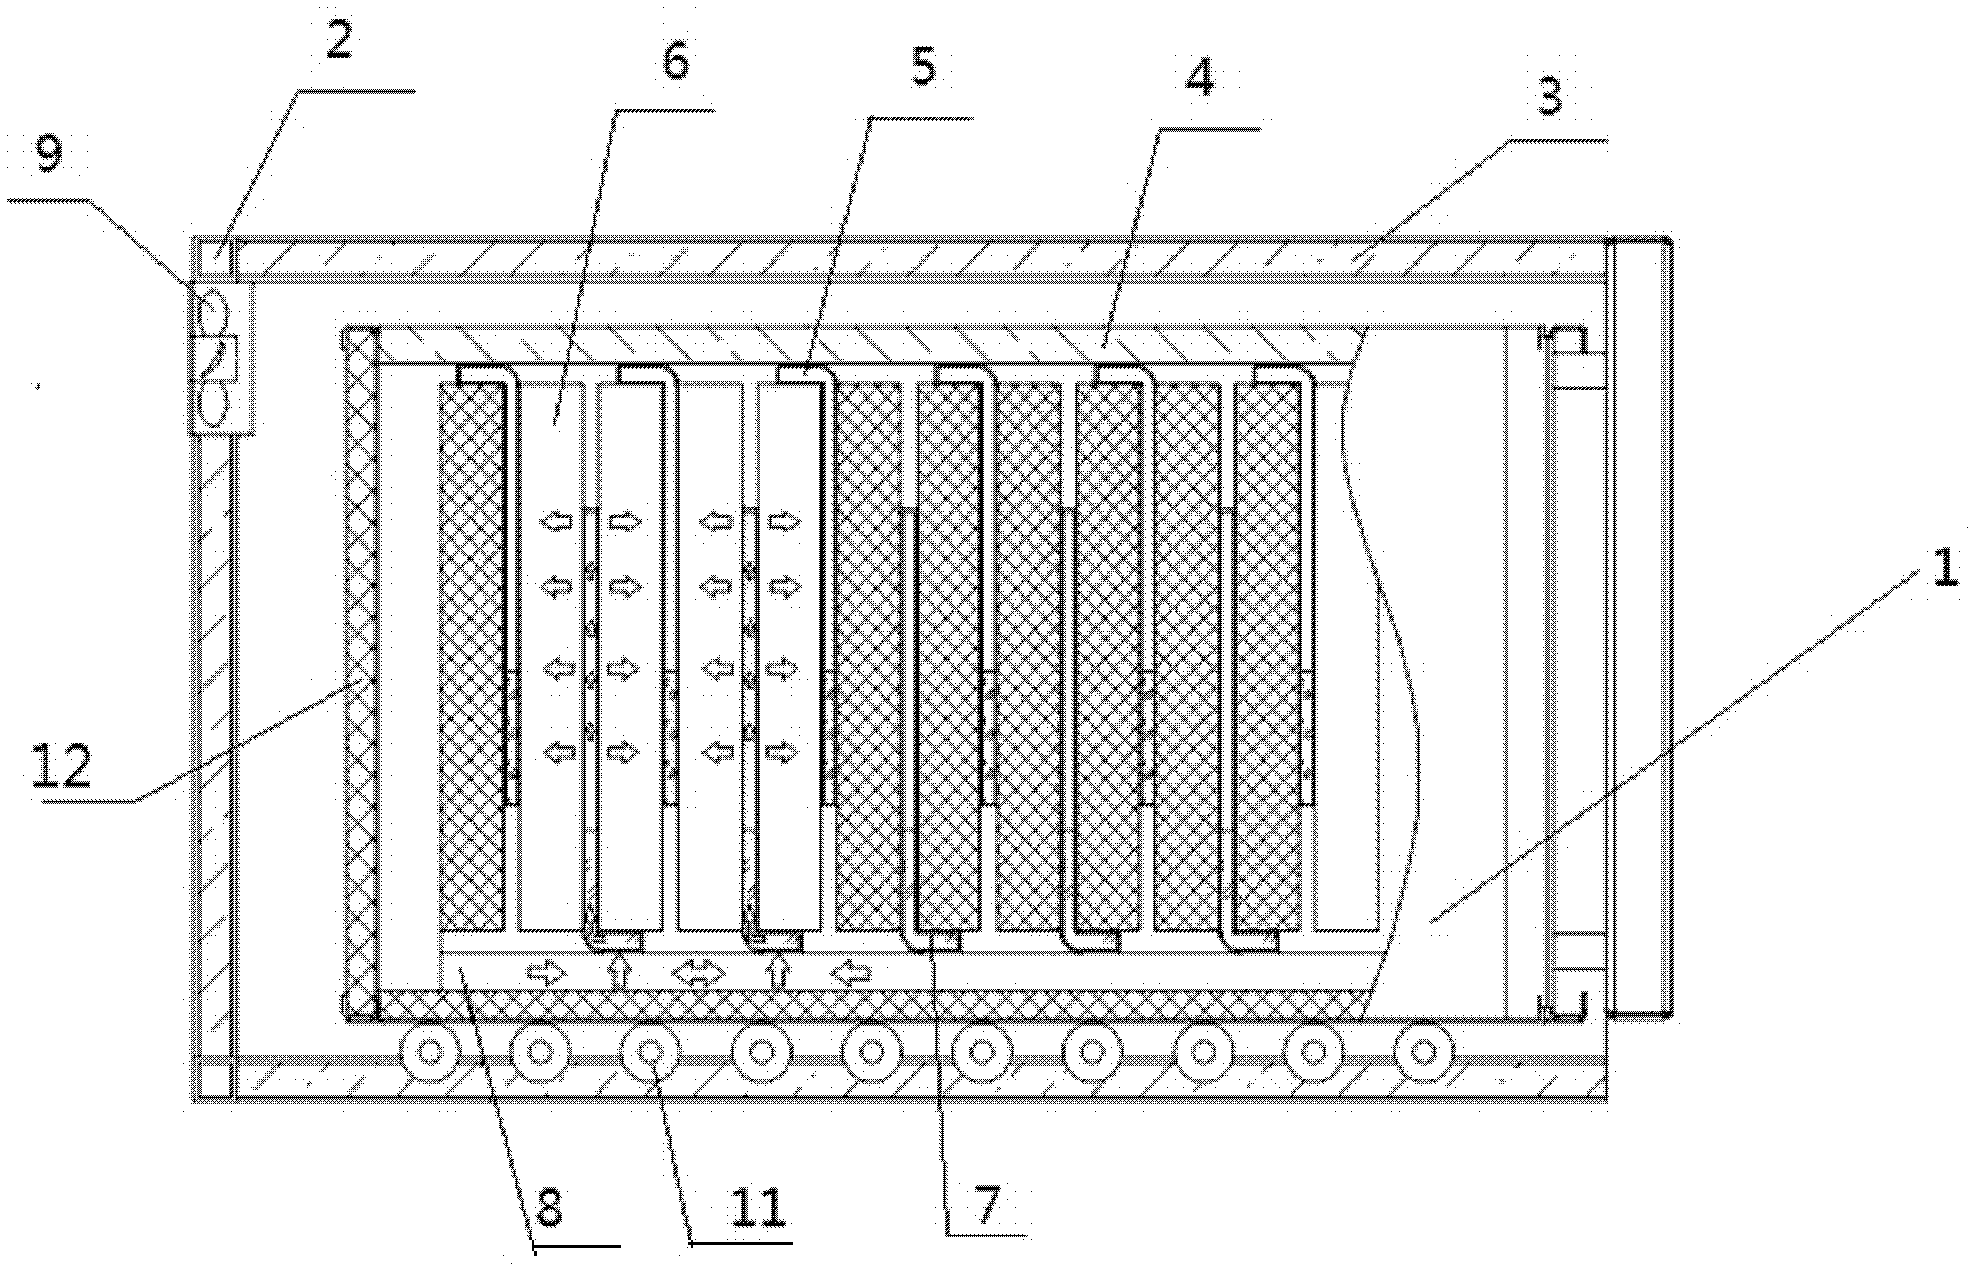 A heat pipe temperature control system for a vehicle power battery box